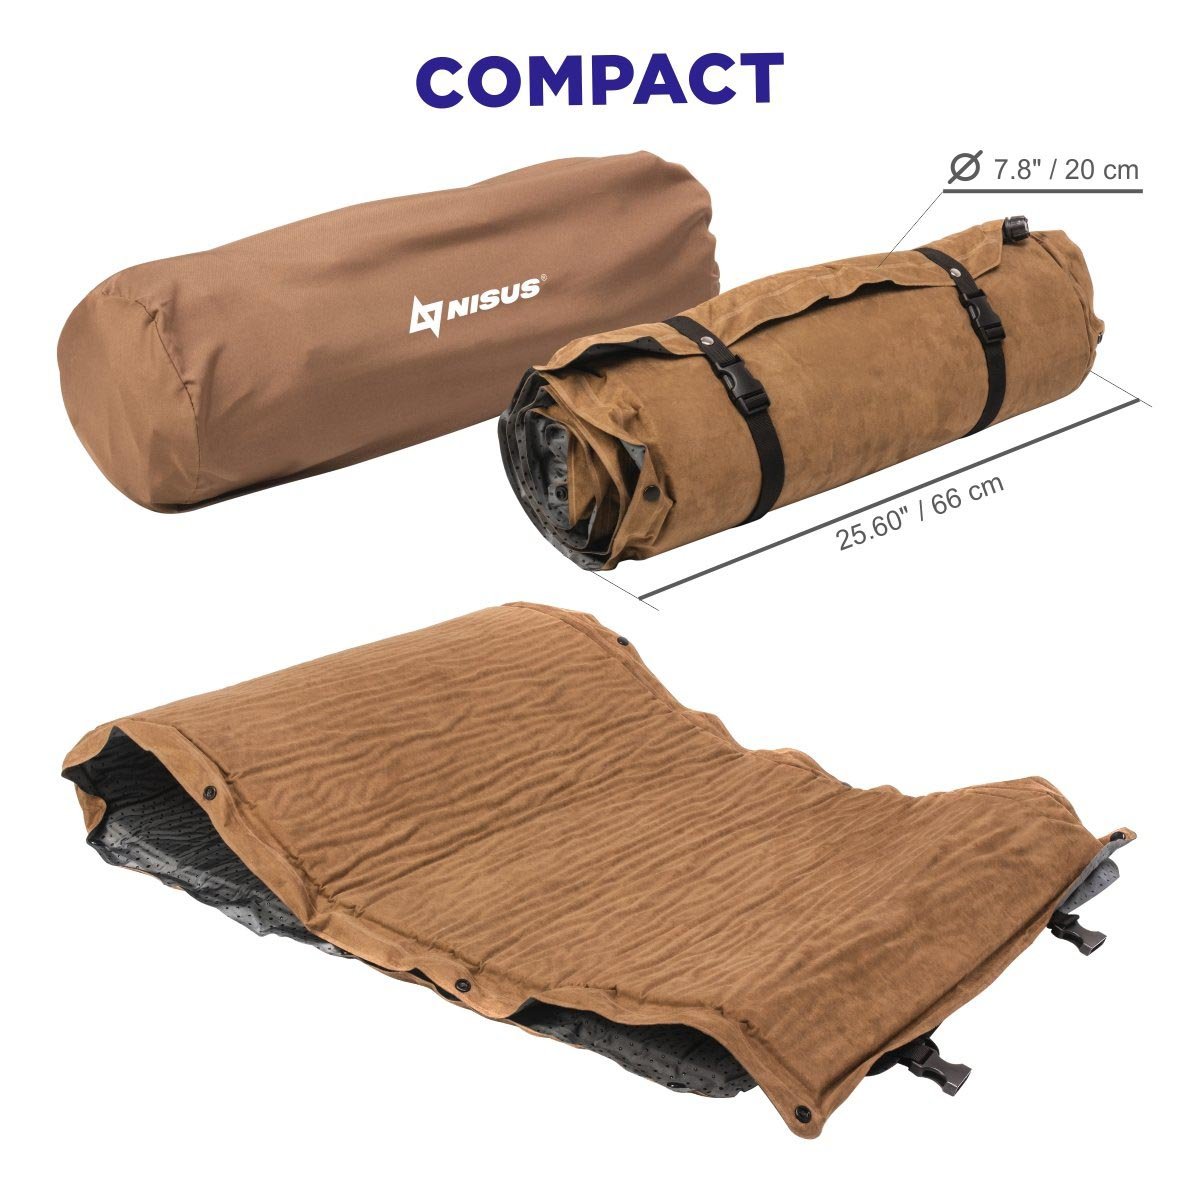 Easy Roll Up and Compact Beige Self Inflating Sleeping Pad for Camping